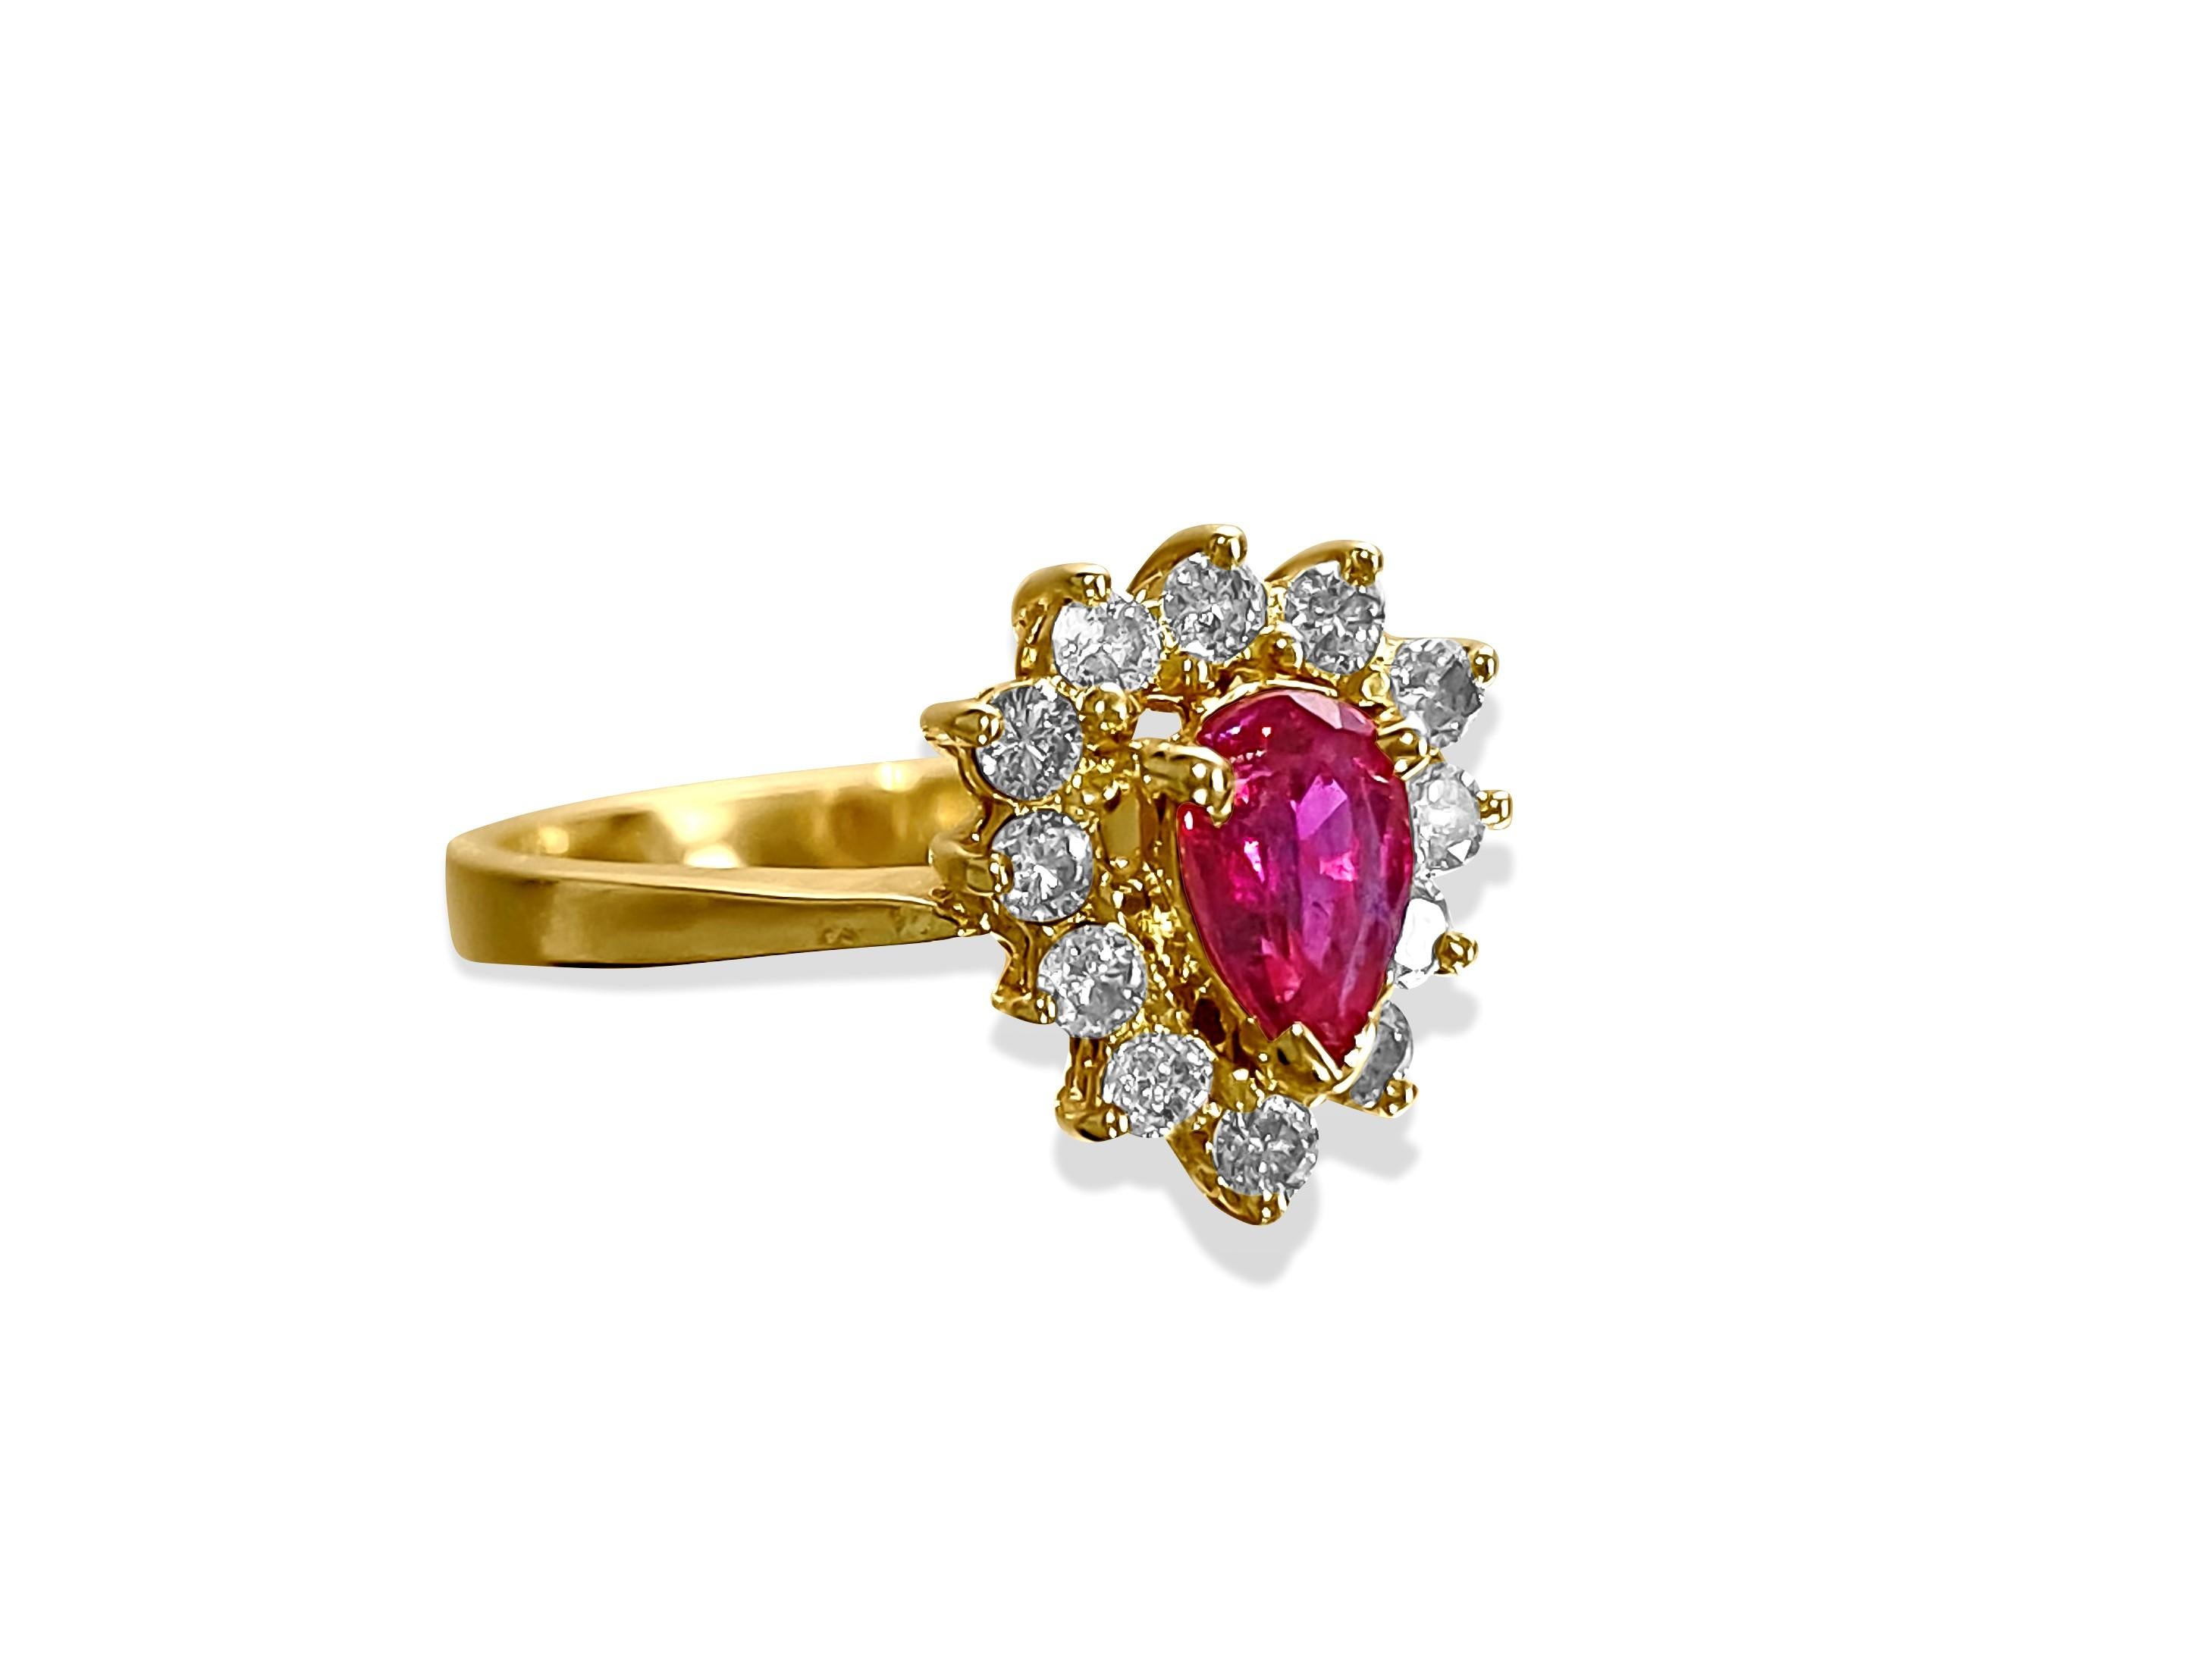 Metal: 14K yellow gold. 

Natural earth mined ruby. Pear shape.
Natural earth mined diamonds. Round brilliant cut. 

Total carat weight of all stones:  1.50 carats (approx)

Free ring resizing available.  
